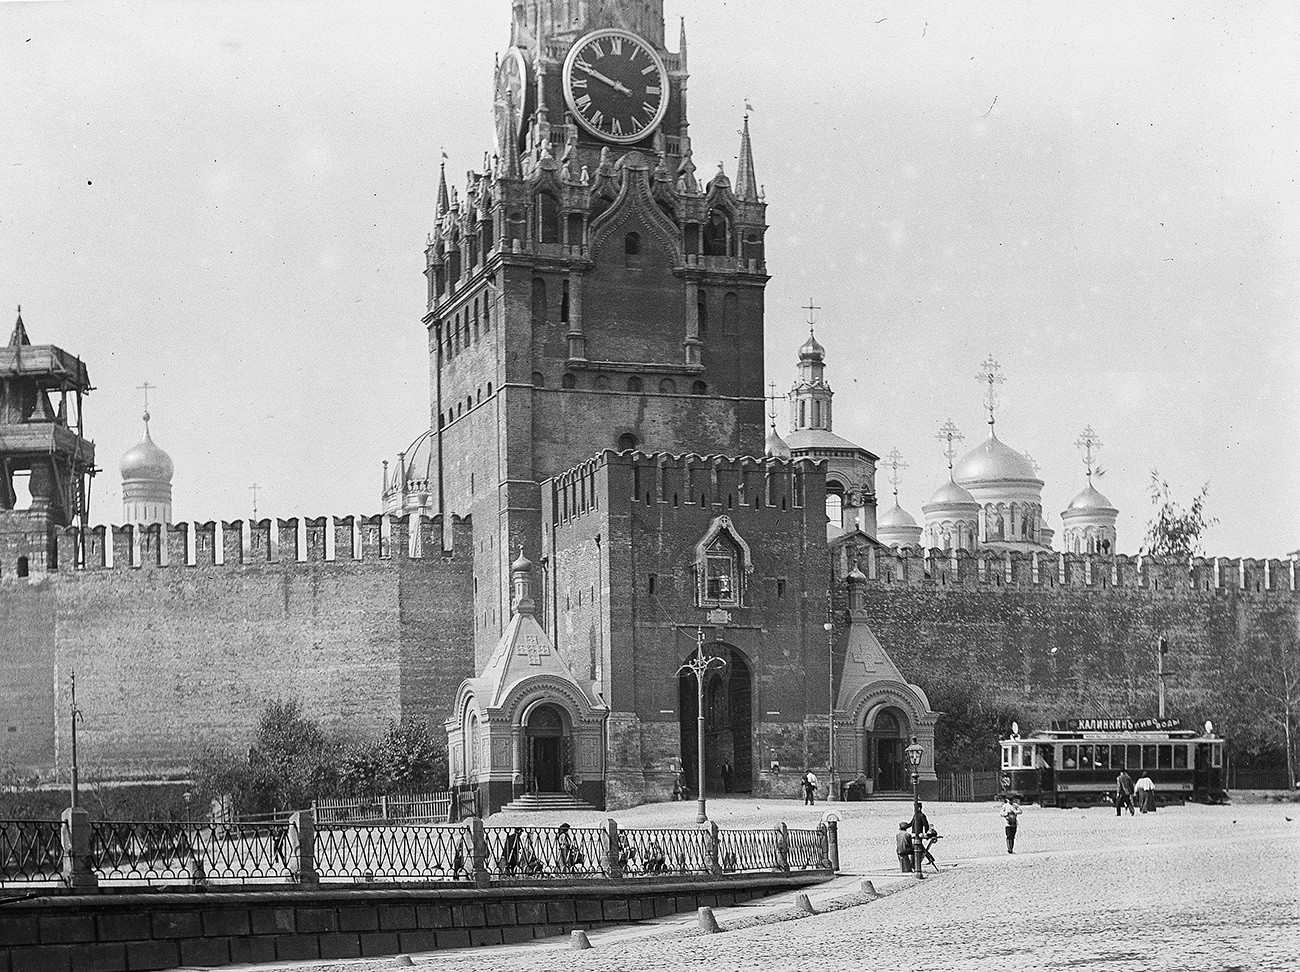 Tram line on the Red Square